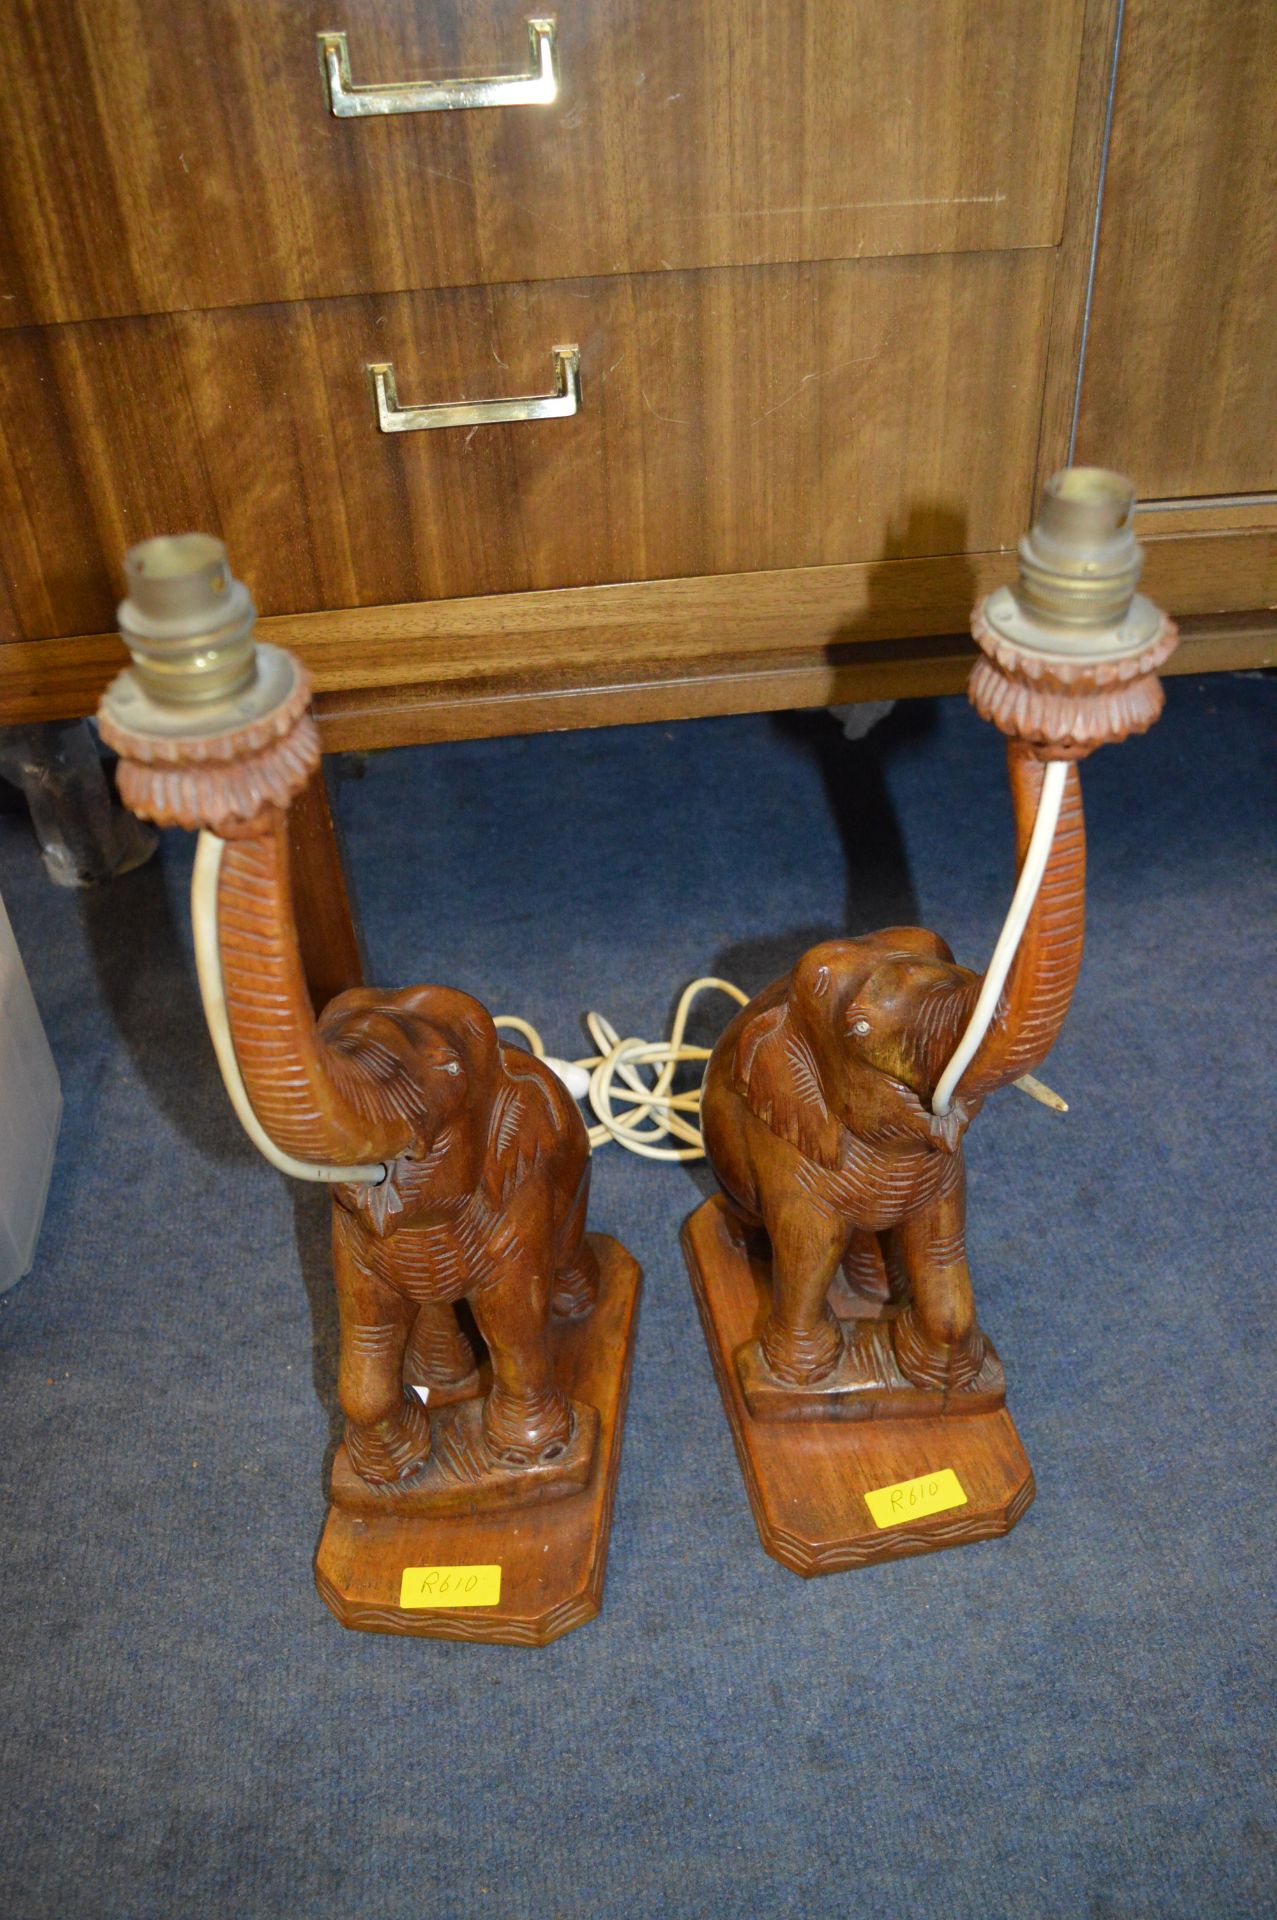 Pair of Carved Wooden Elephant Table Lamp Bases - Image 2 of 2